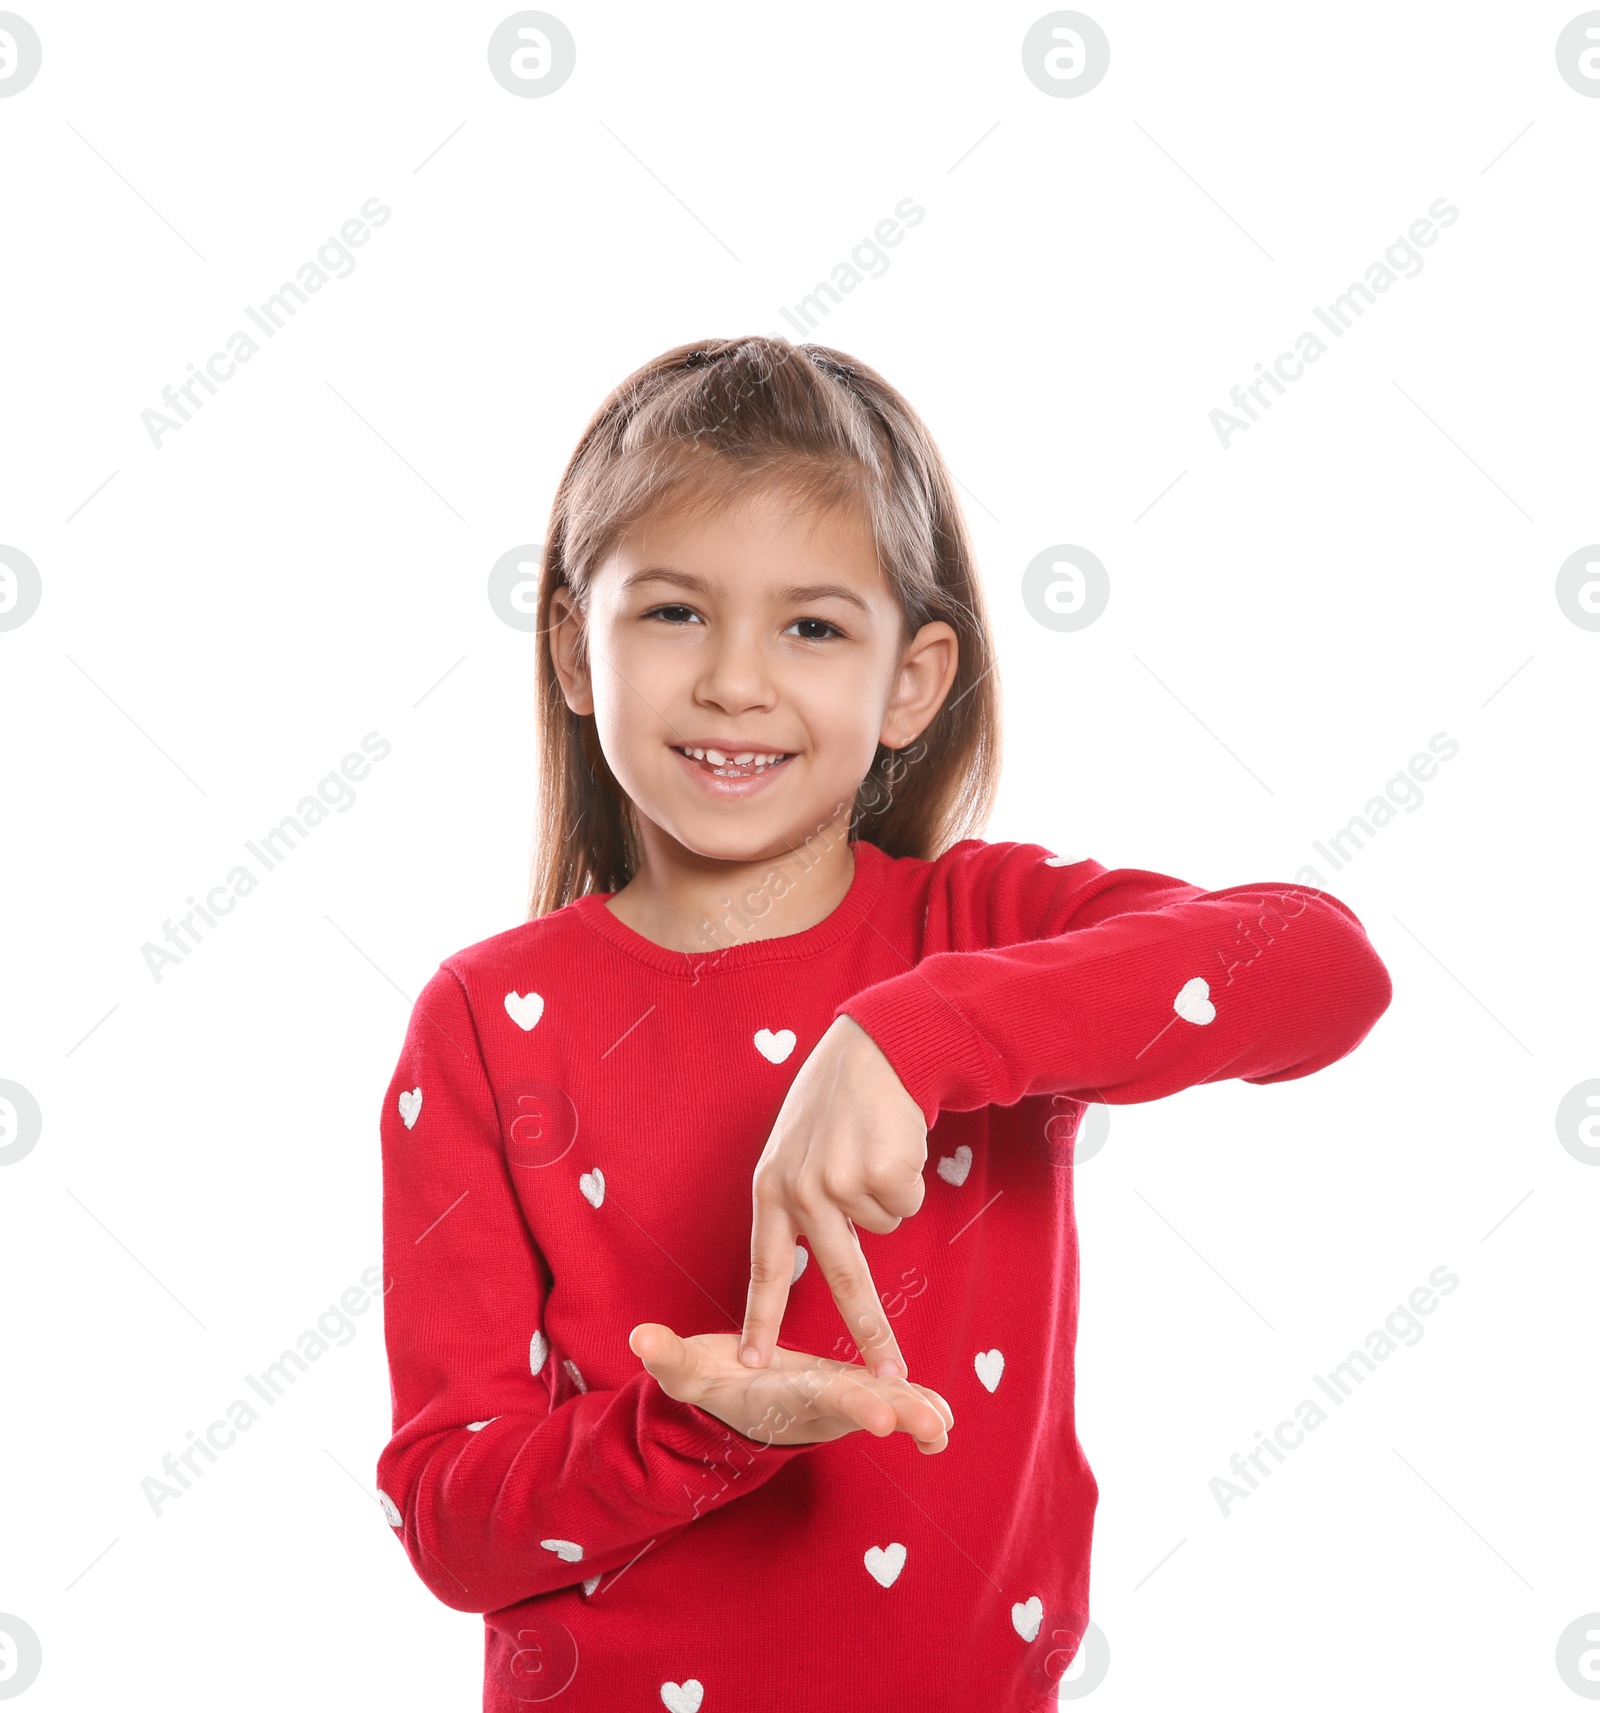 Photo of Little girl showing STAND gesture in sign language on white background